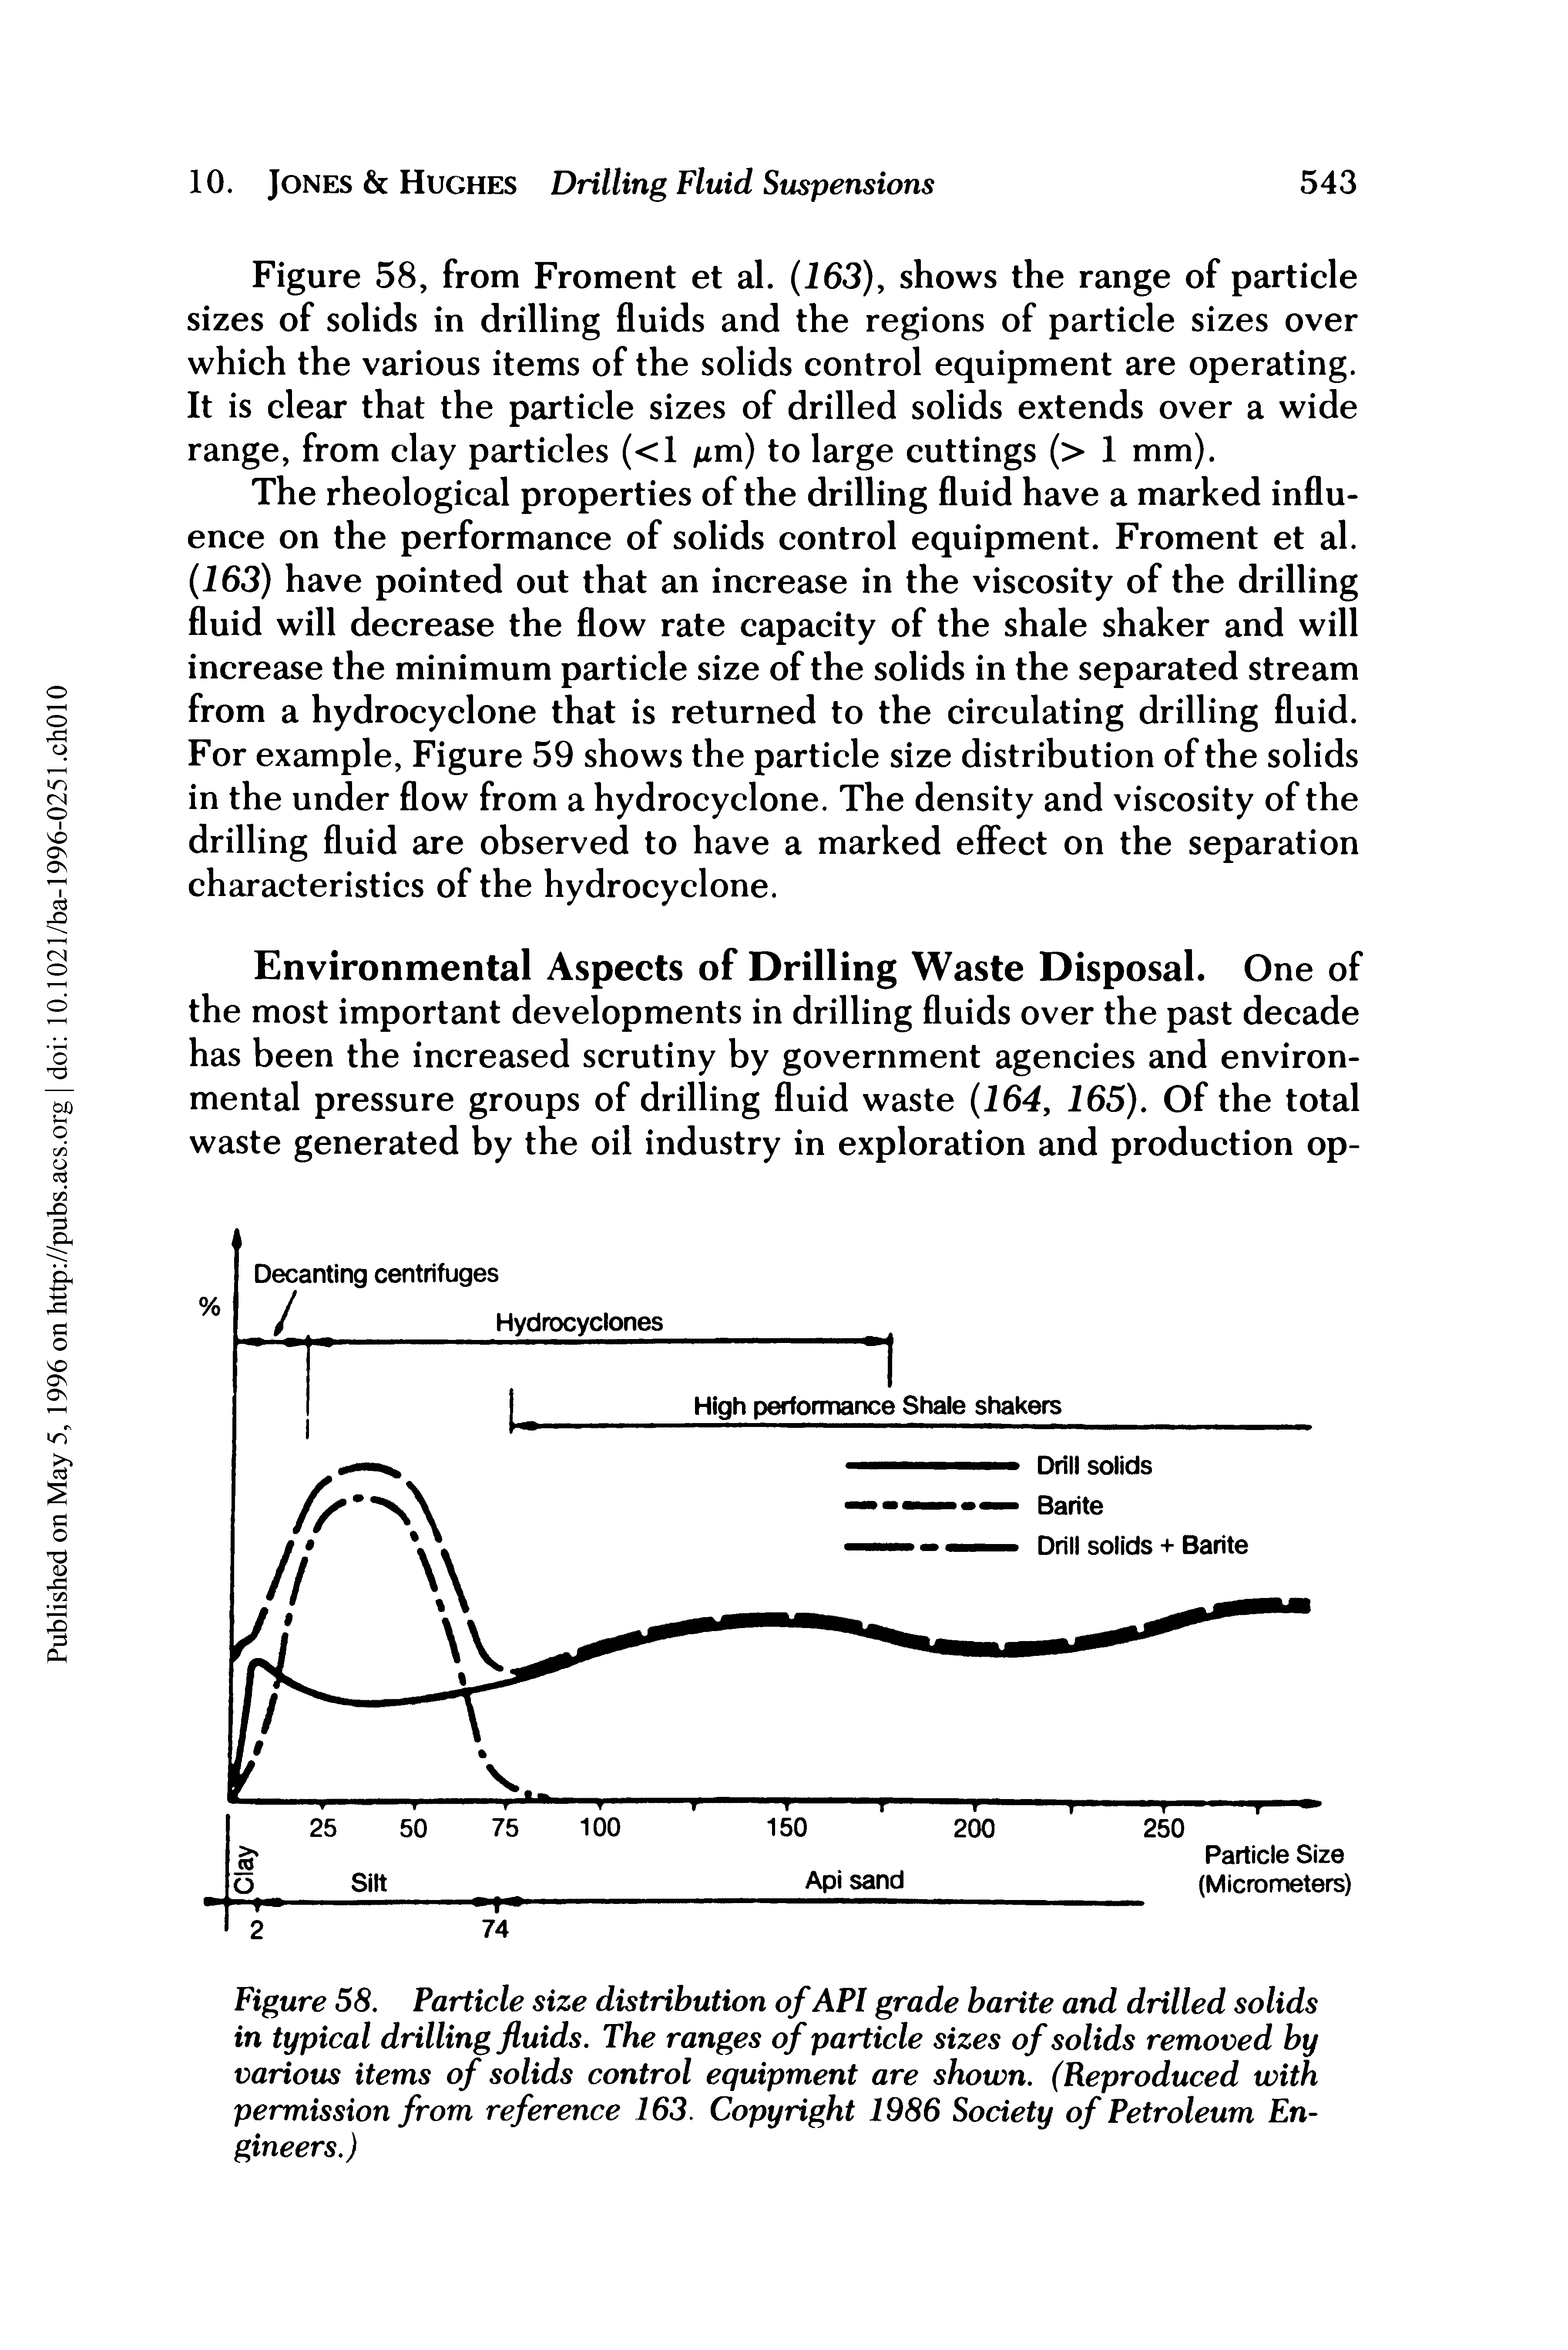 Figure 58. Particle size distribution of API grade barite and drilled solids in typical drilling fluids. The ranges of particle sizes of solids removed by various items of solids control equipment are shown. (Reproduced with permission from reference 163. Copyright 1986 Society of Petroleum Engineers.)...